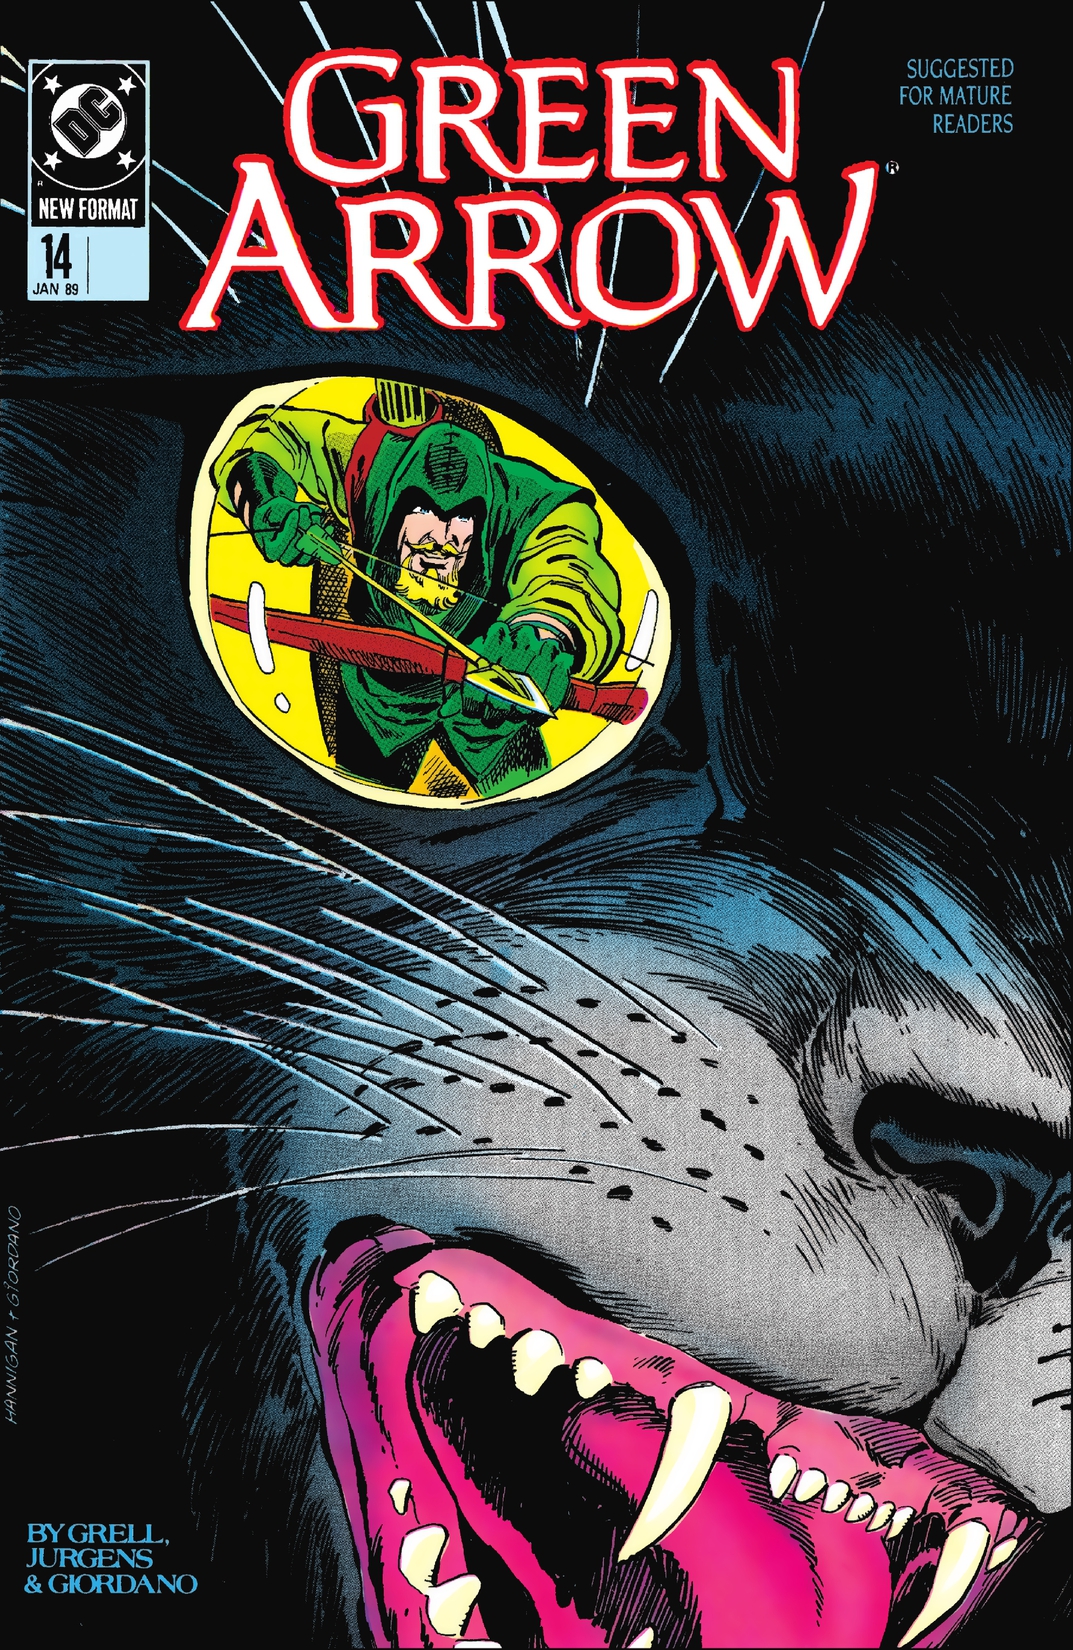 Green Arrow (1987-) #14 preview images